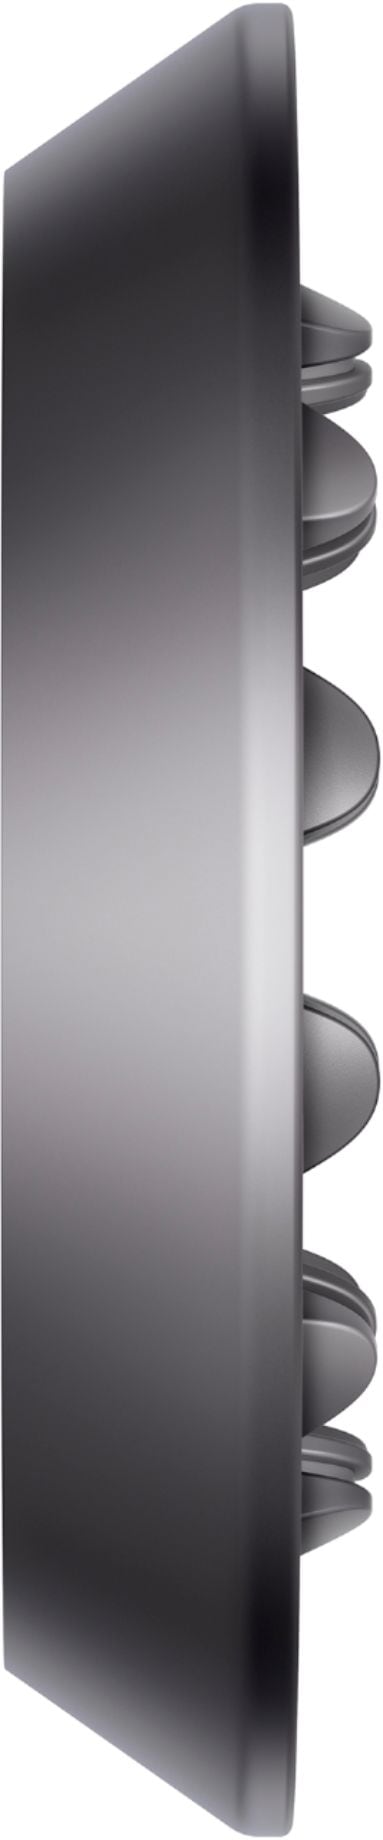 Dyson - Supersonic Gentle Air attachment - Iron_1